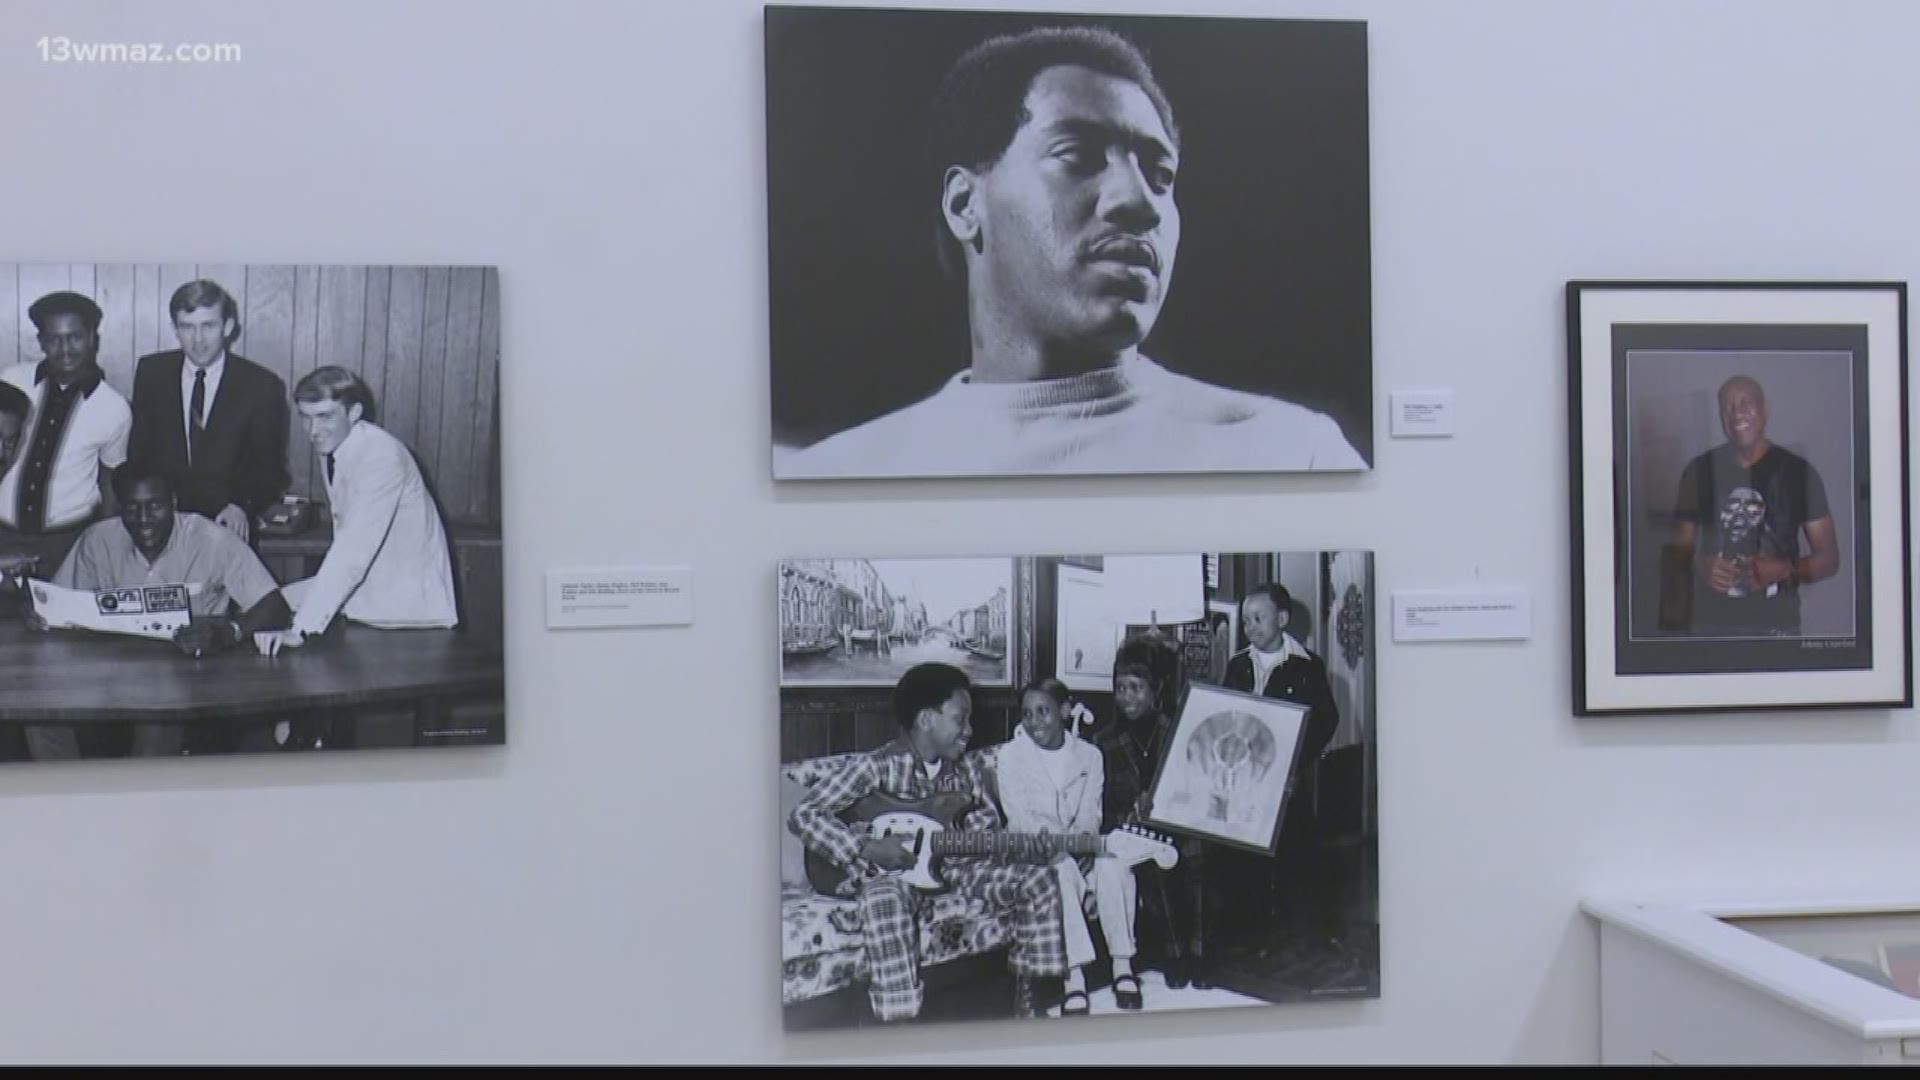 Some Central Georgia music legends are receiving recognition with a new exhibit at the Tubman Museum.